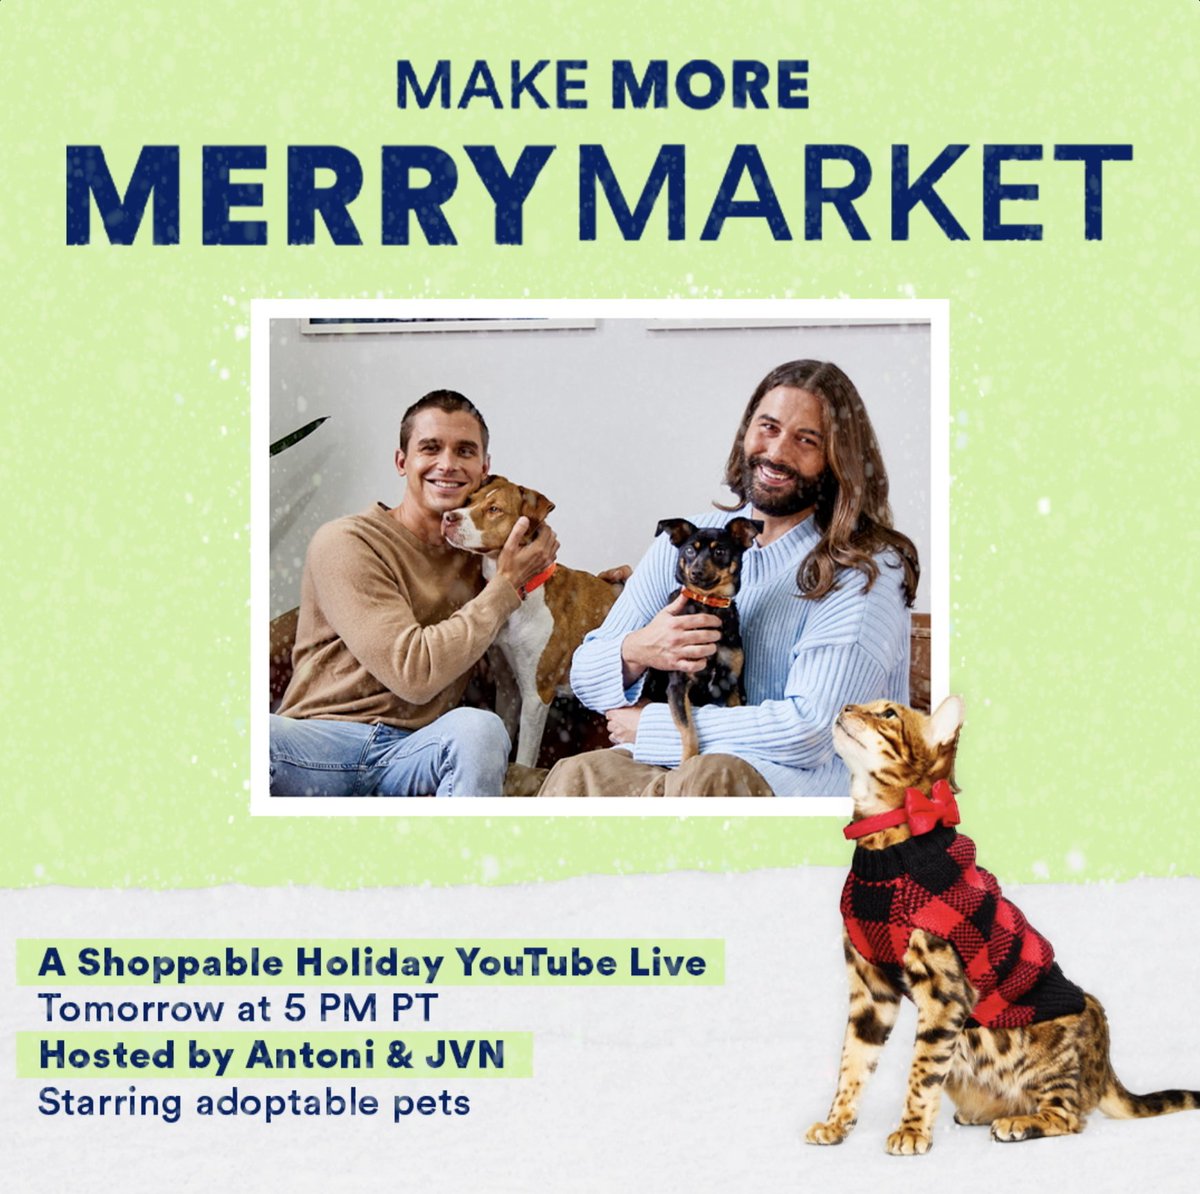 Tune in tomorrow for our event on YouTube Live! Join @antoni and @jvn tomorrow at 5 pm PT to shop all the best Petco products for turning the season into a happy, safe, and comfortable experience for your pet! Ring the bell to be notified: bit.ly/3We5PLI